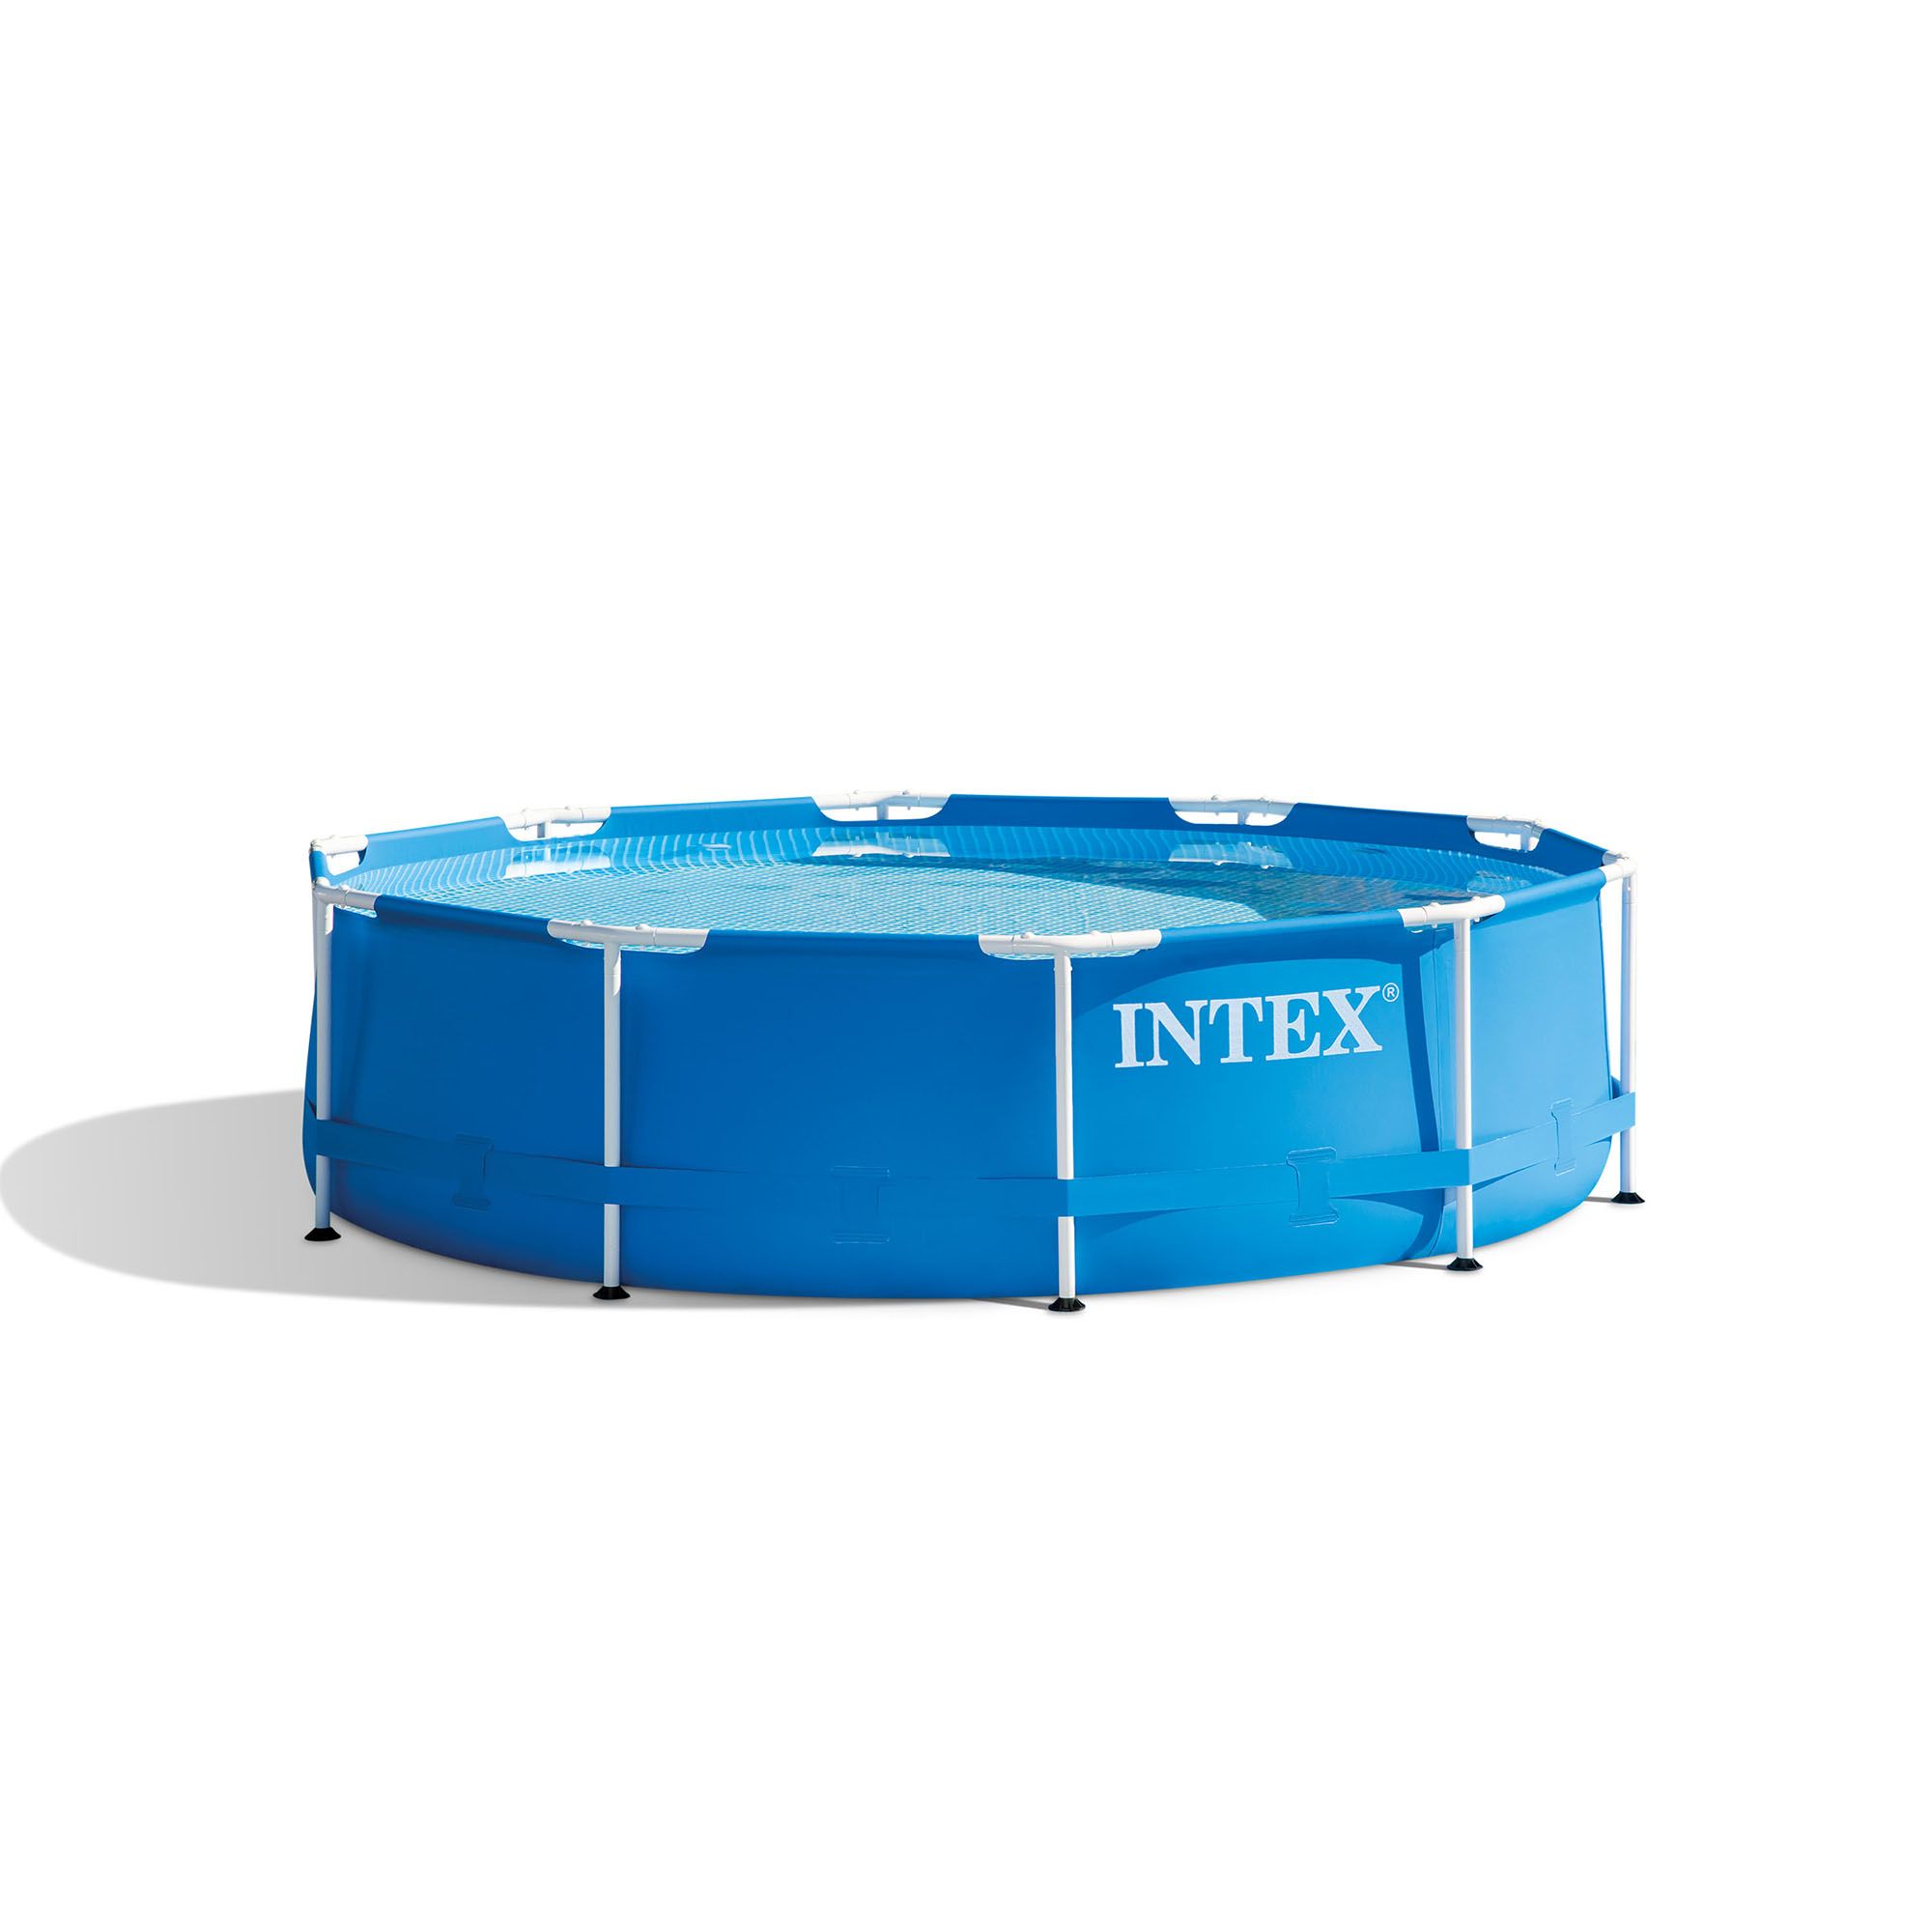 Intex 10' x 30" Metal Frame Above Ground Swimming Pool with Filter Pump | Walmart (US)